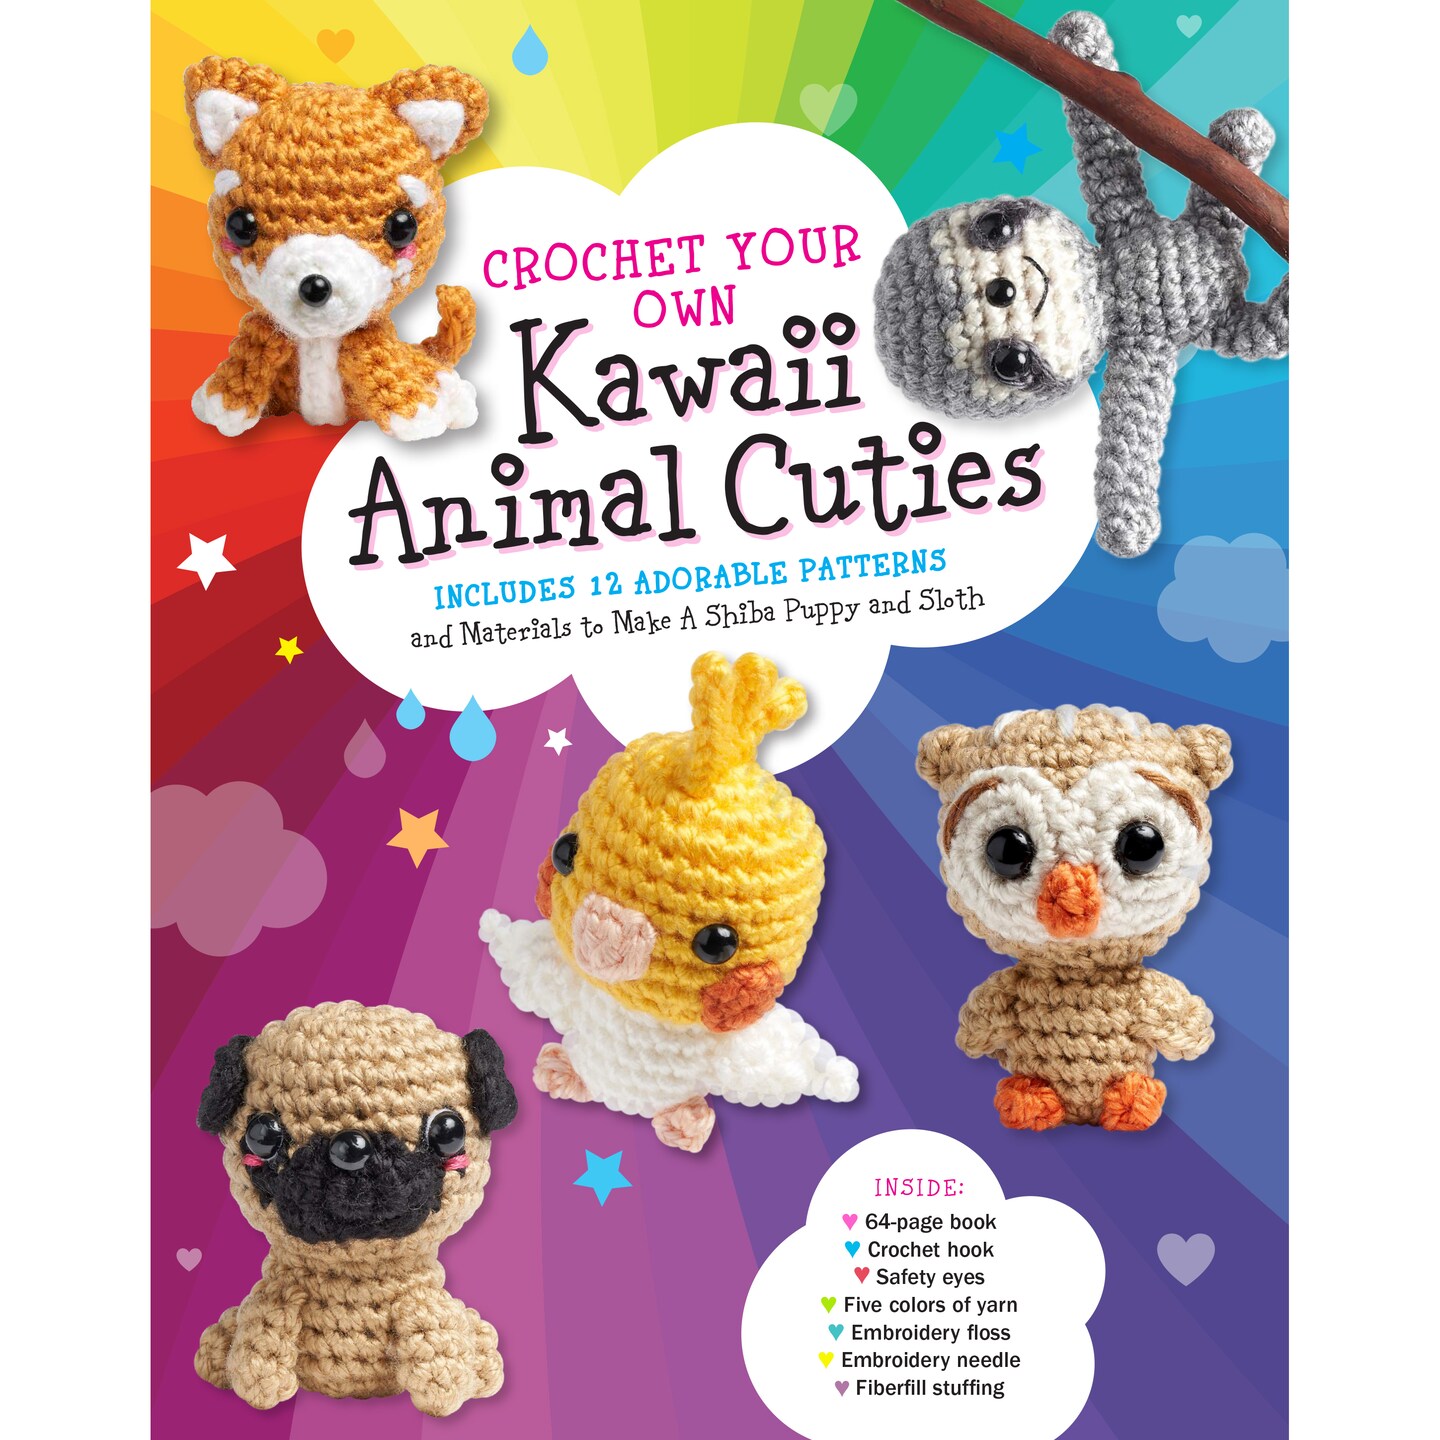 Have you guys seen these at Michaels? They are mini crochet kits